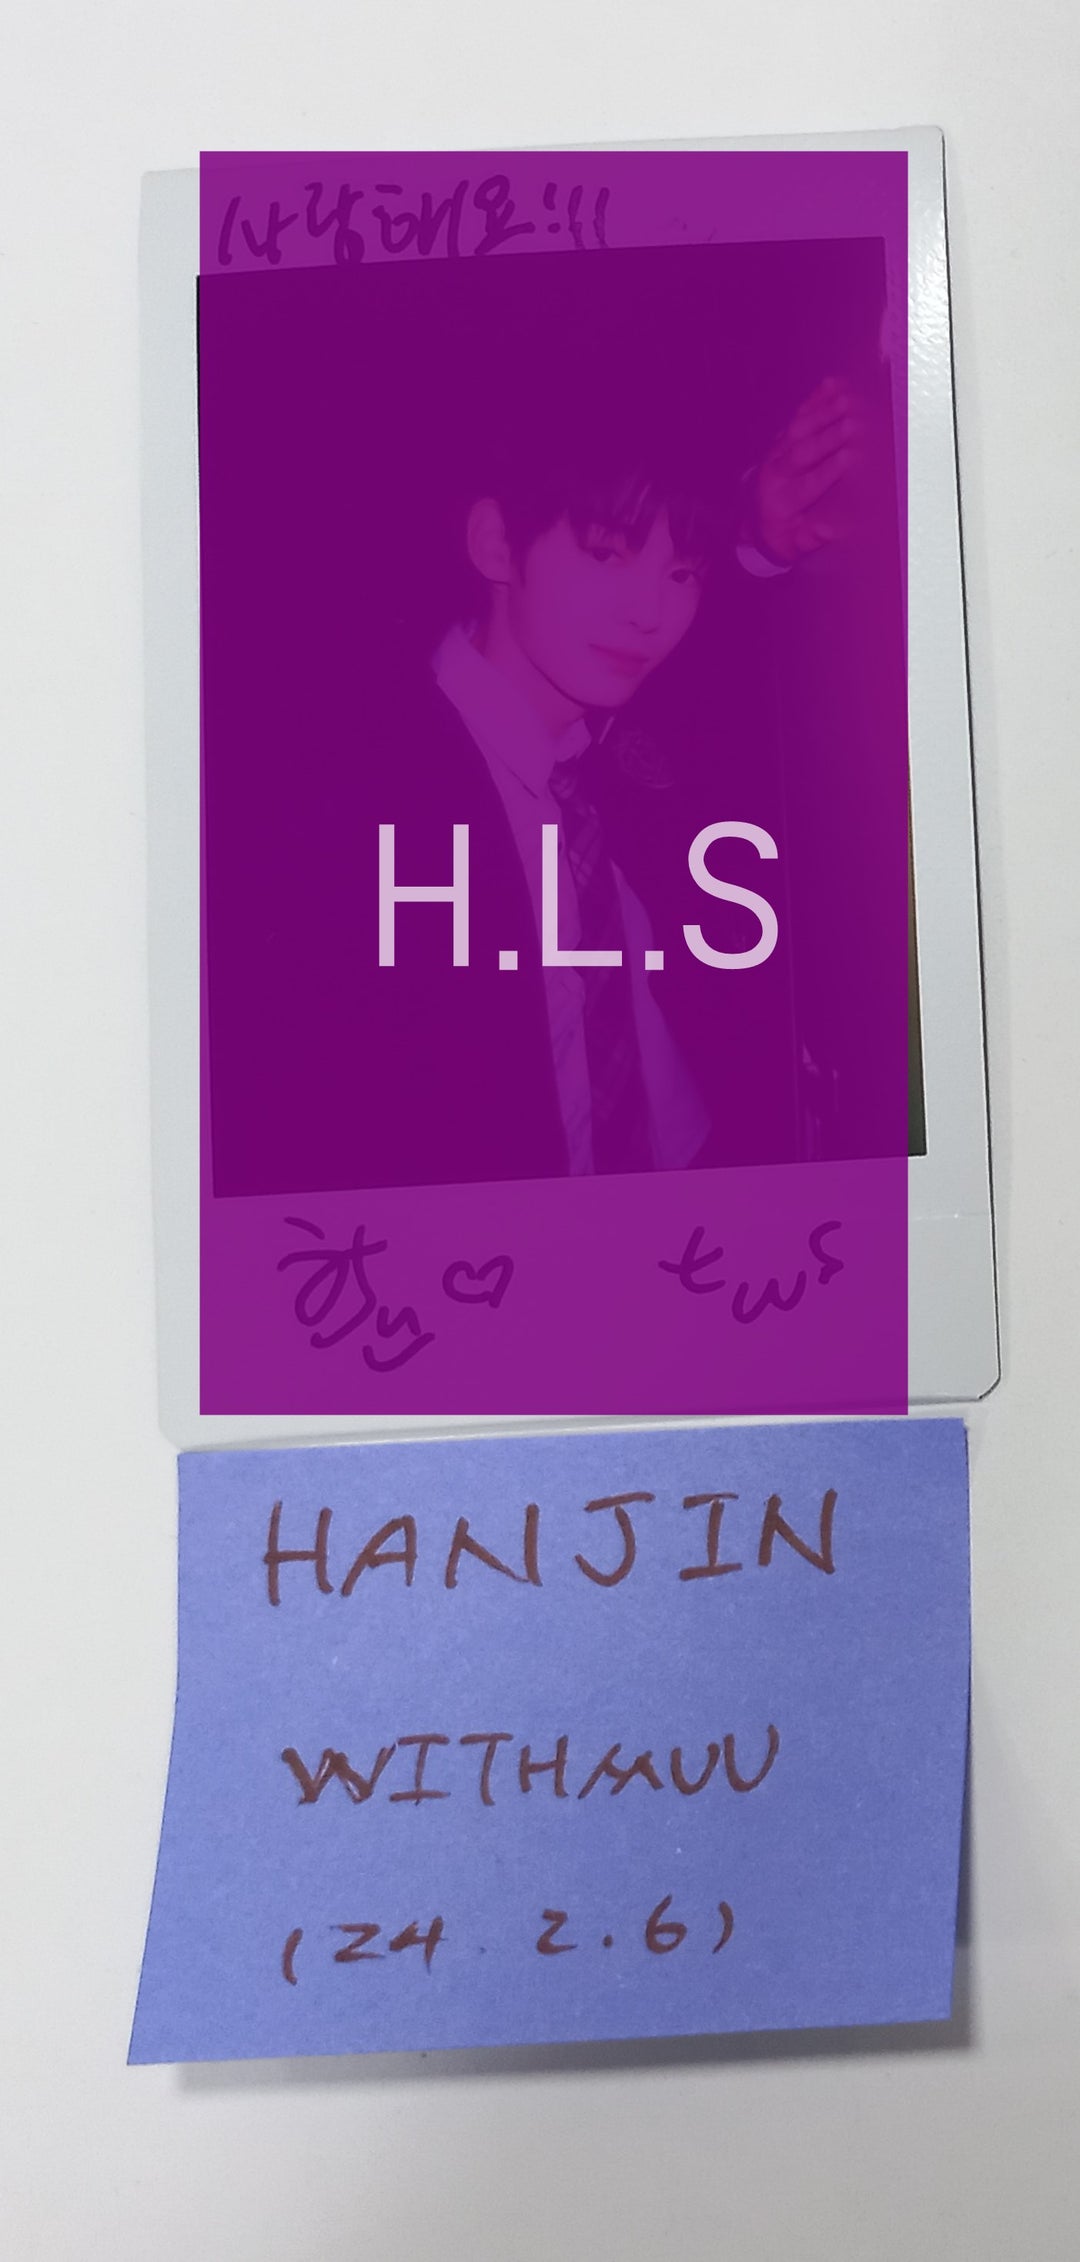 HANJIN (Of TWS) "Sparkling Blue" 1st Mini - Hand Autographed(Signed) Polaroid [24.2.6]